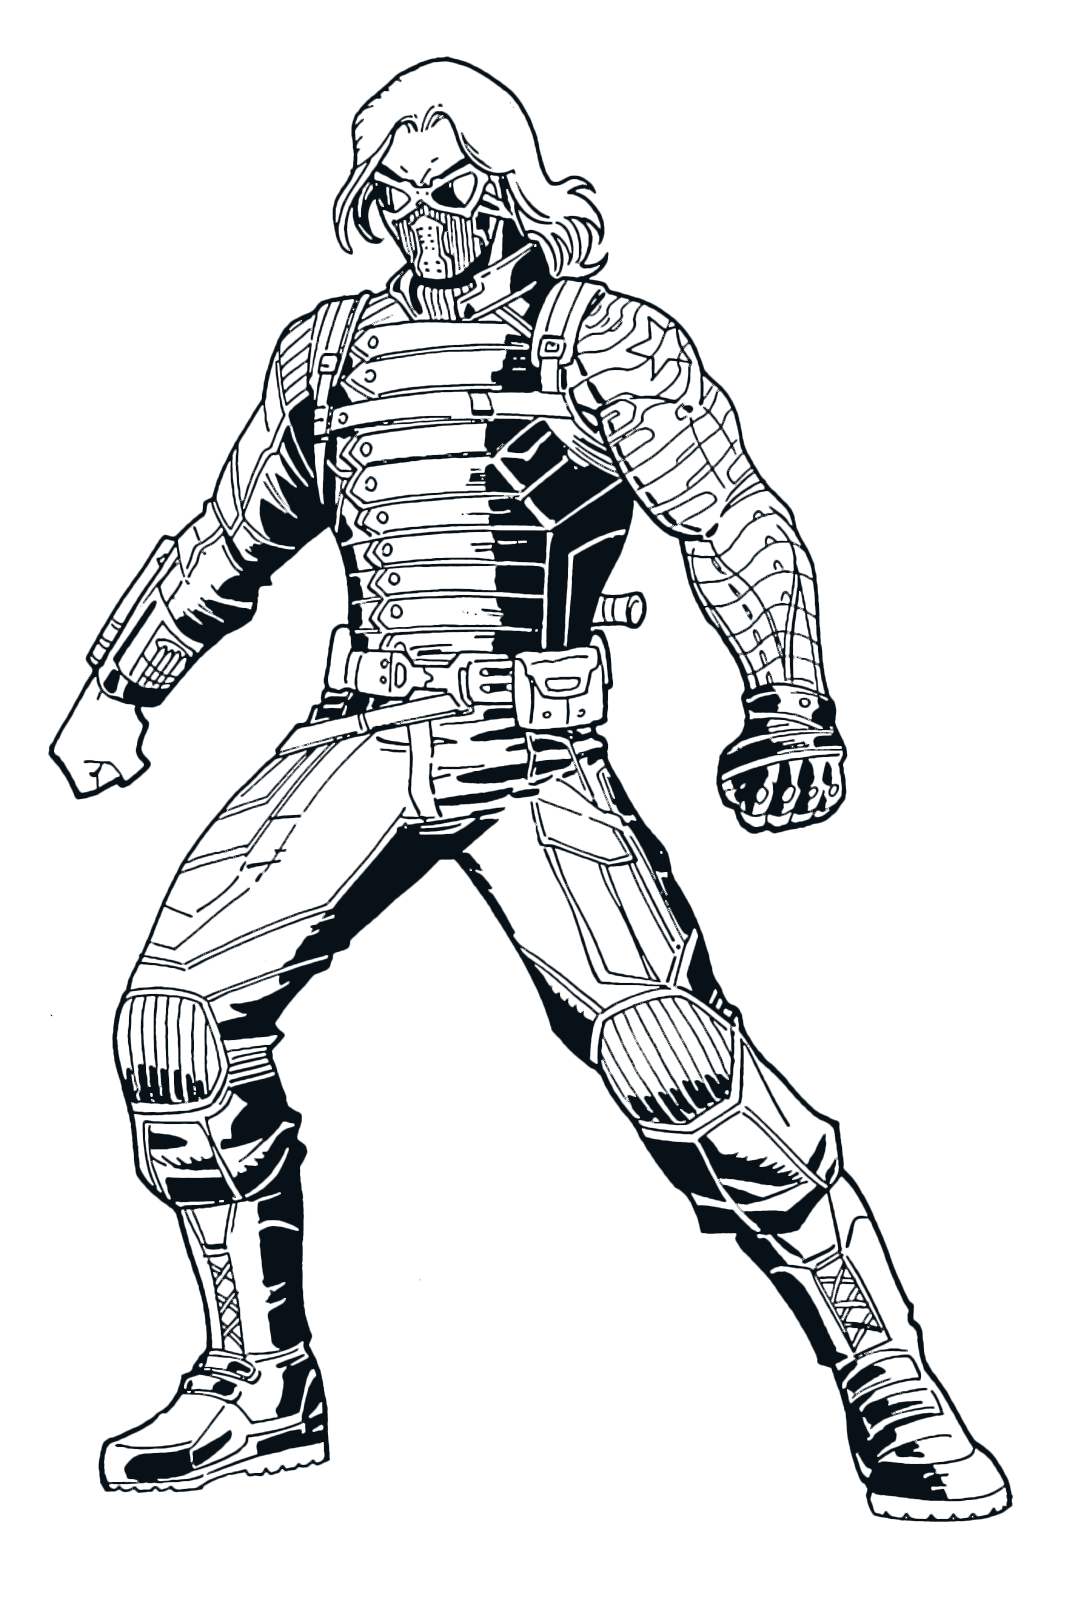 Winter Solider - Avengers Coloring Pages